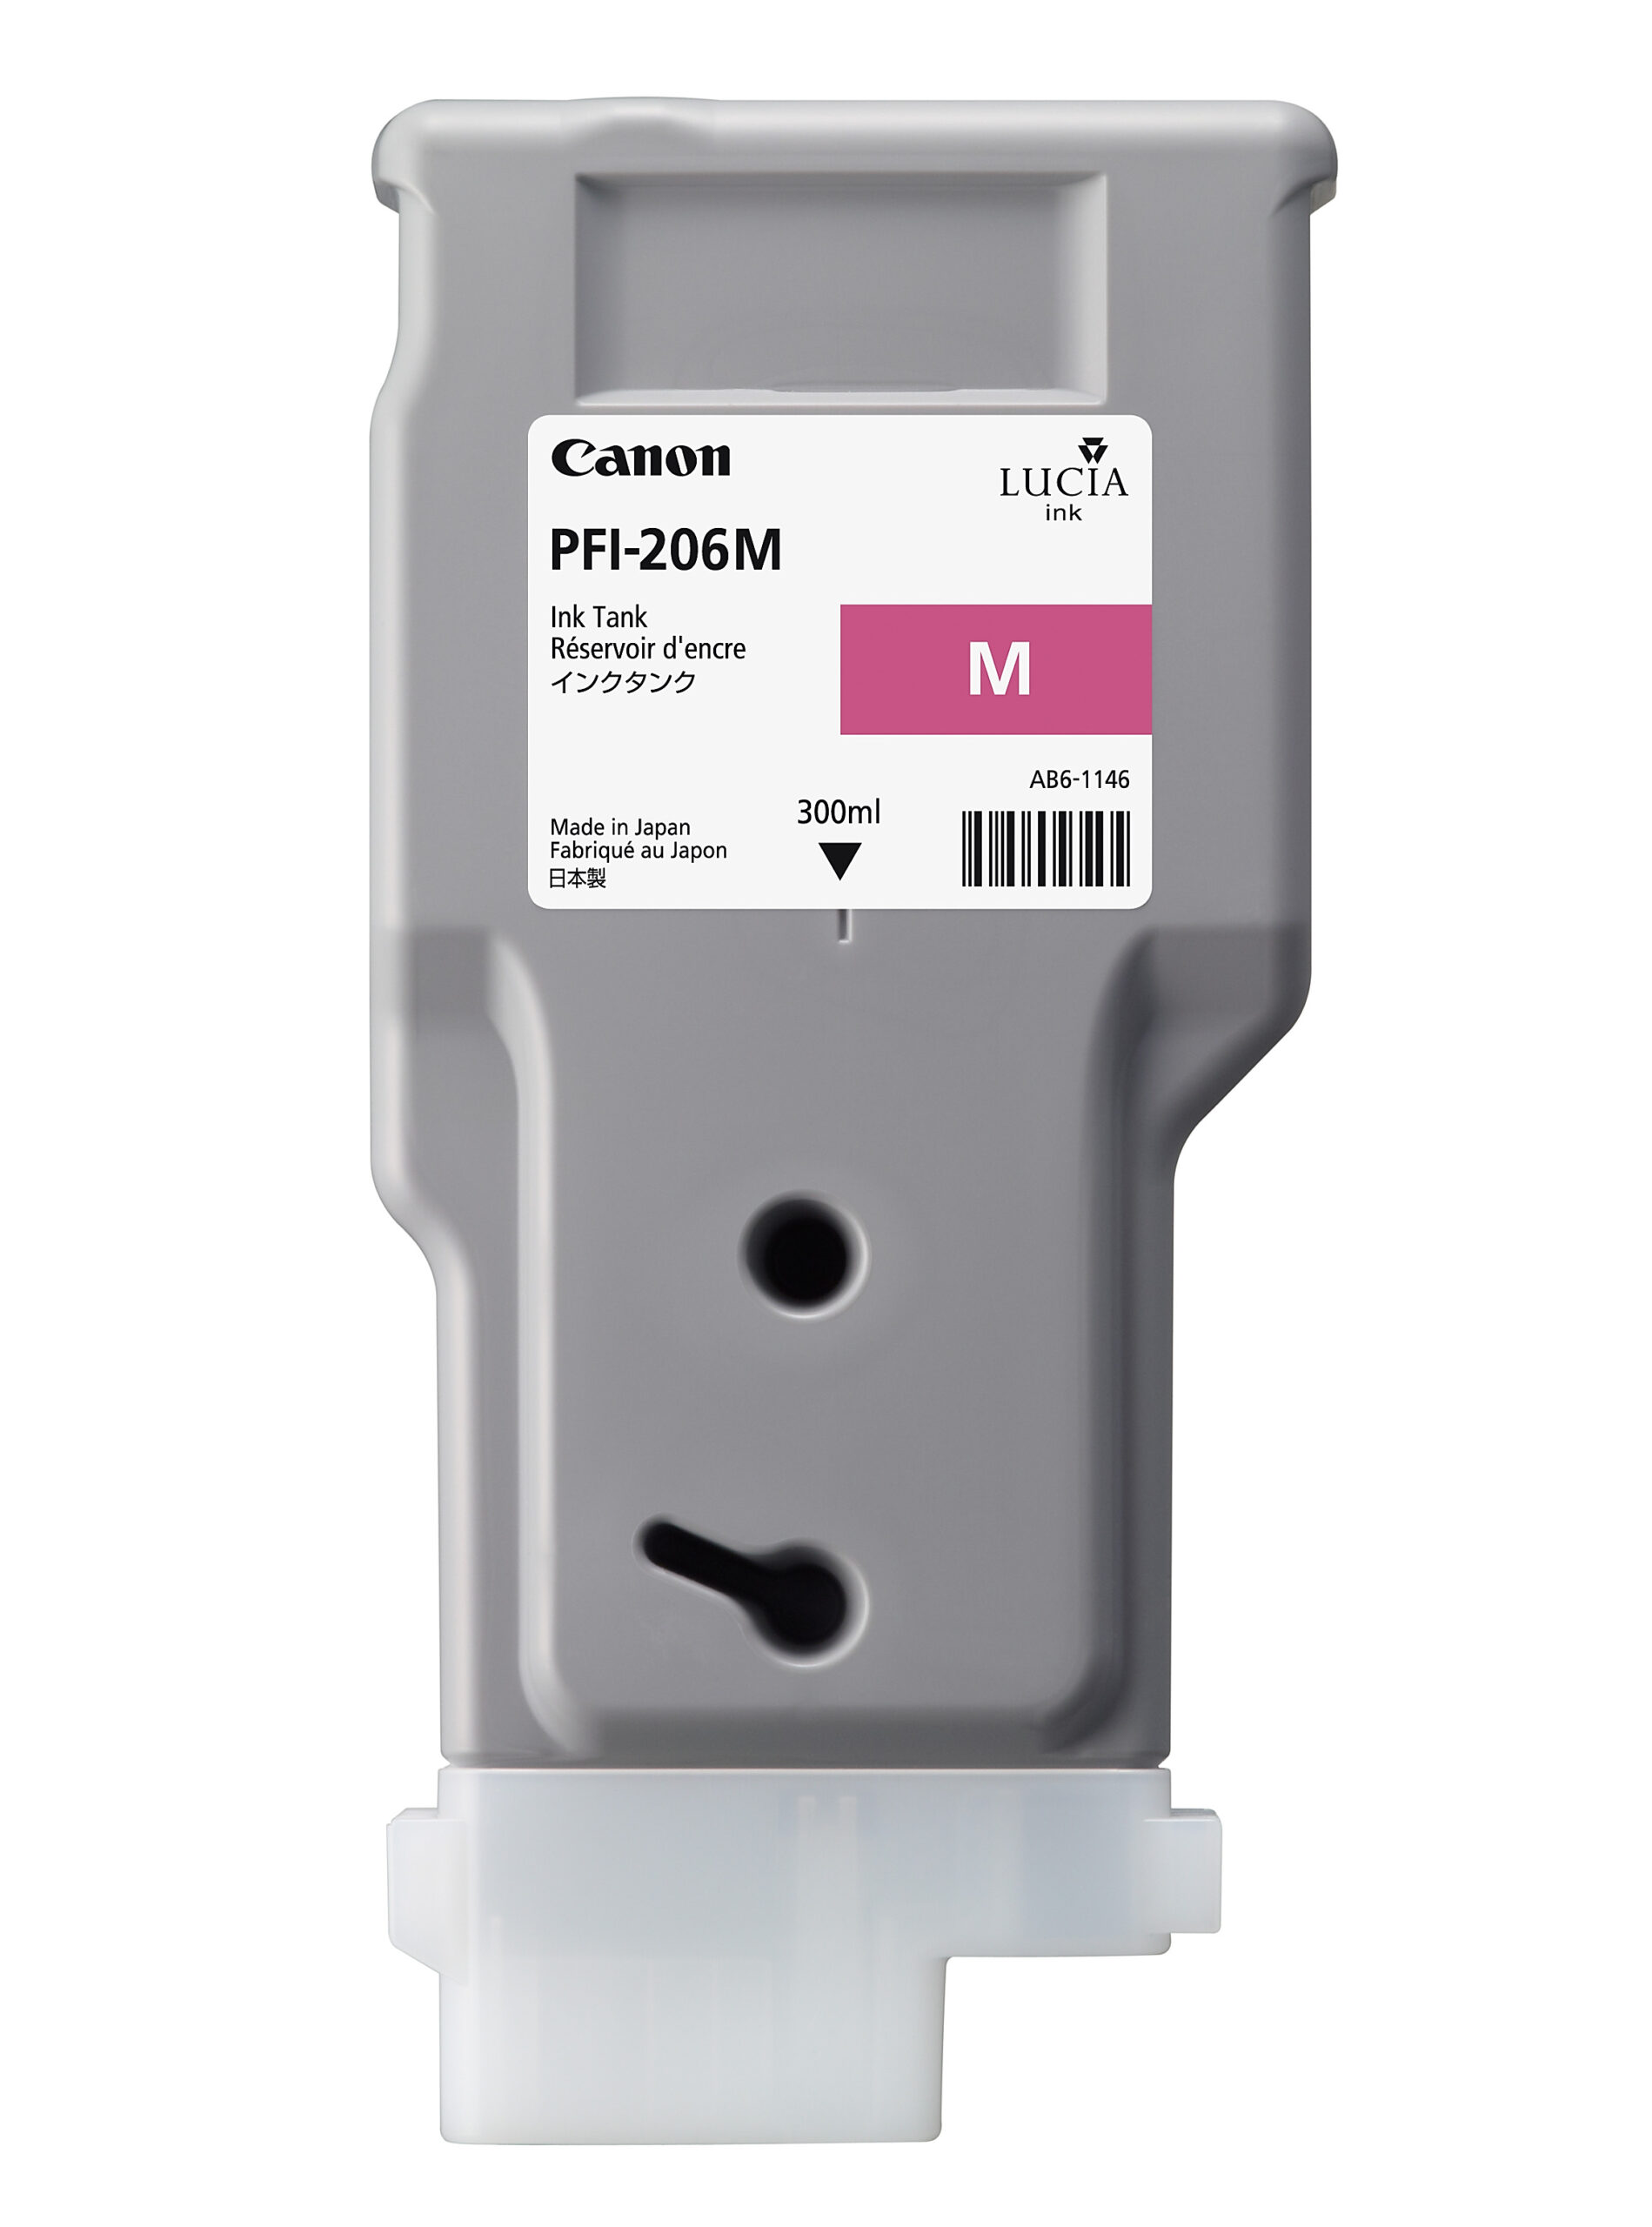 Canon PFI-206M Printer Ink Cartridge - Magenta Ink Tank - 300ml - 5305B001AA - for Canon iPF6400, iPF6400S, iPF6400SE, iPF6450 Printers - express delivery from GDS - Graphic Design Supplies Ltd